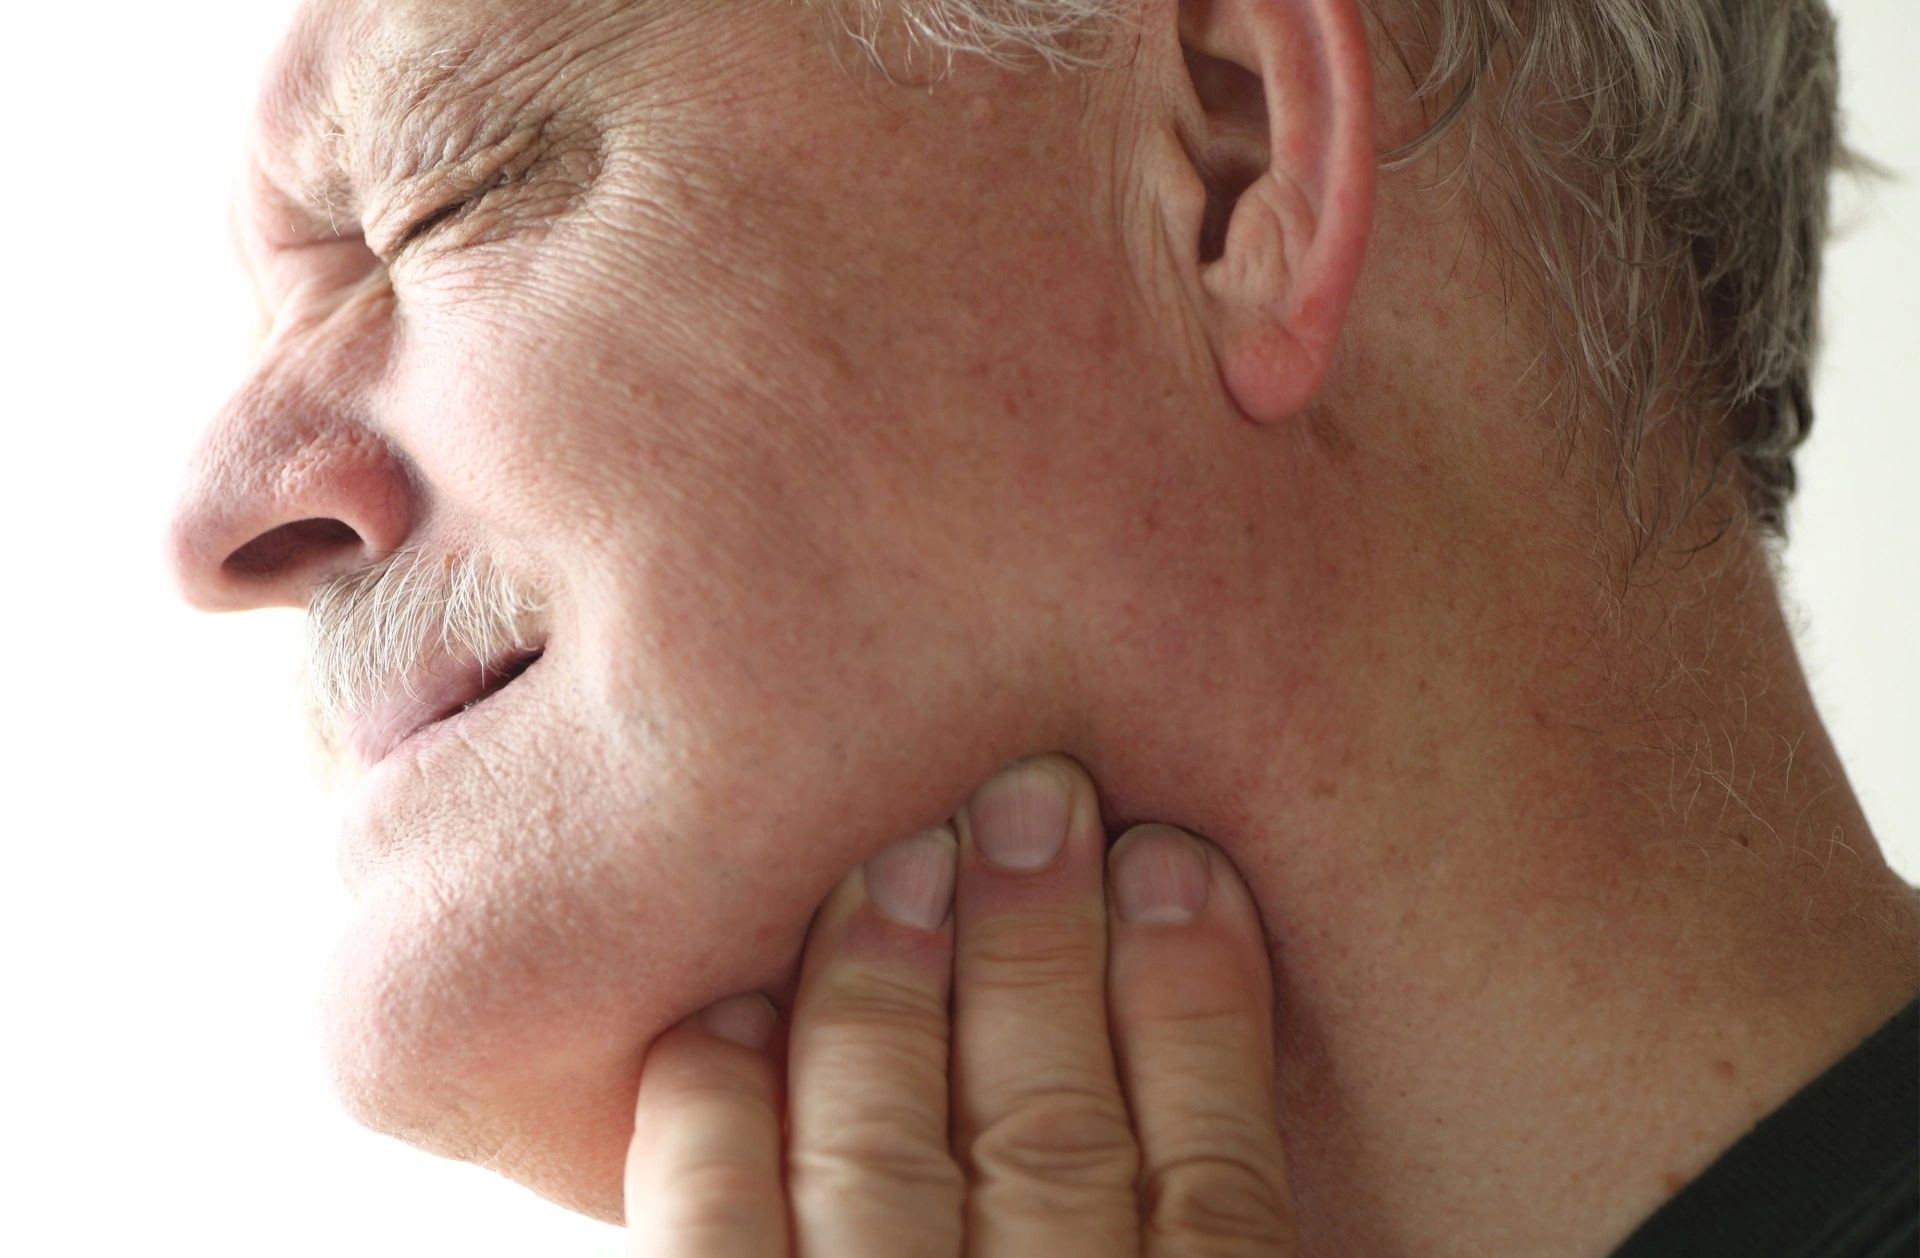 How Can Stress Impact Jaw Pain And Discomfort?